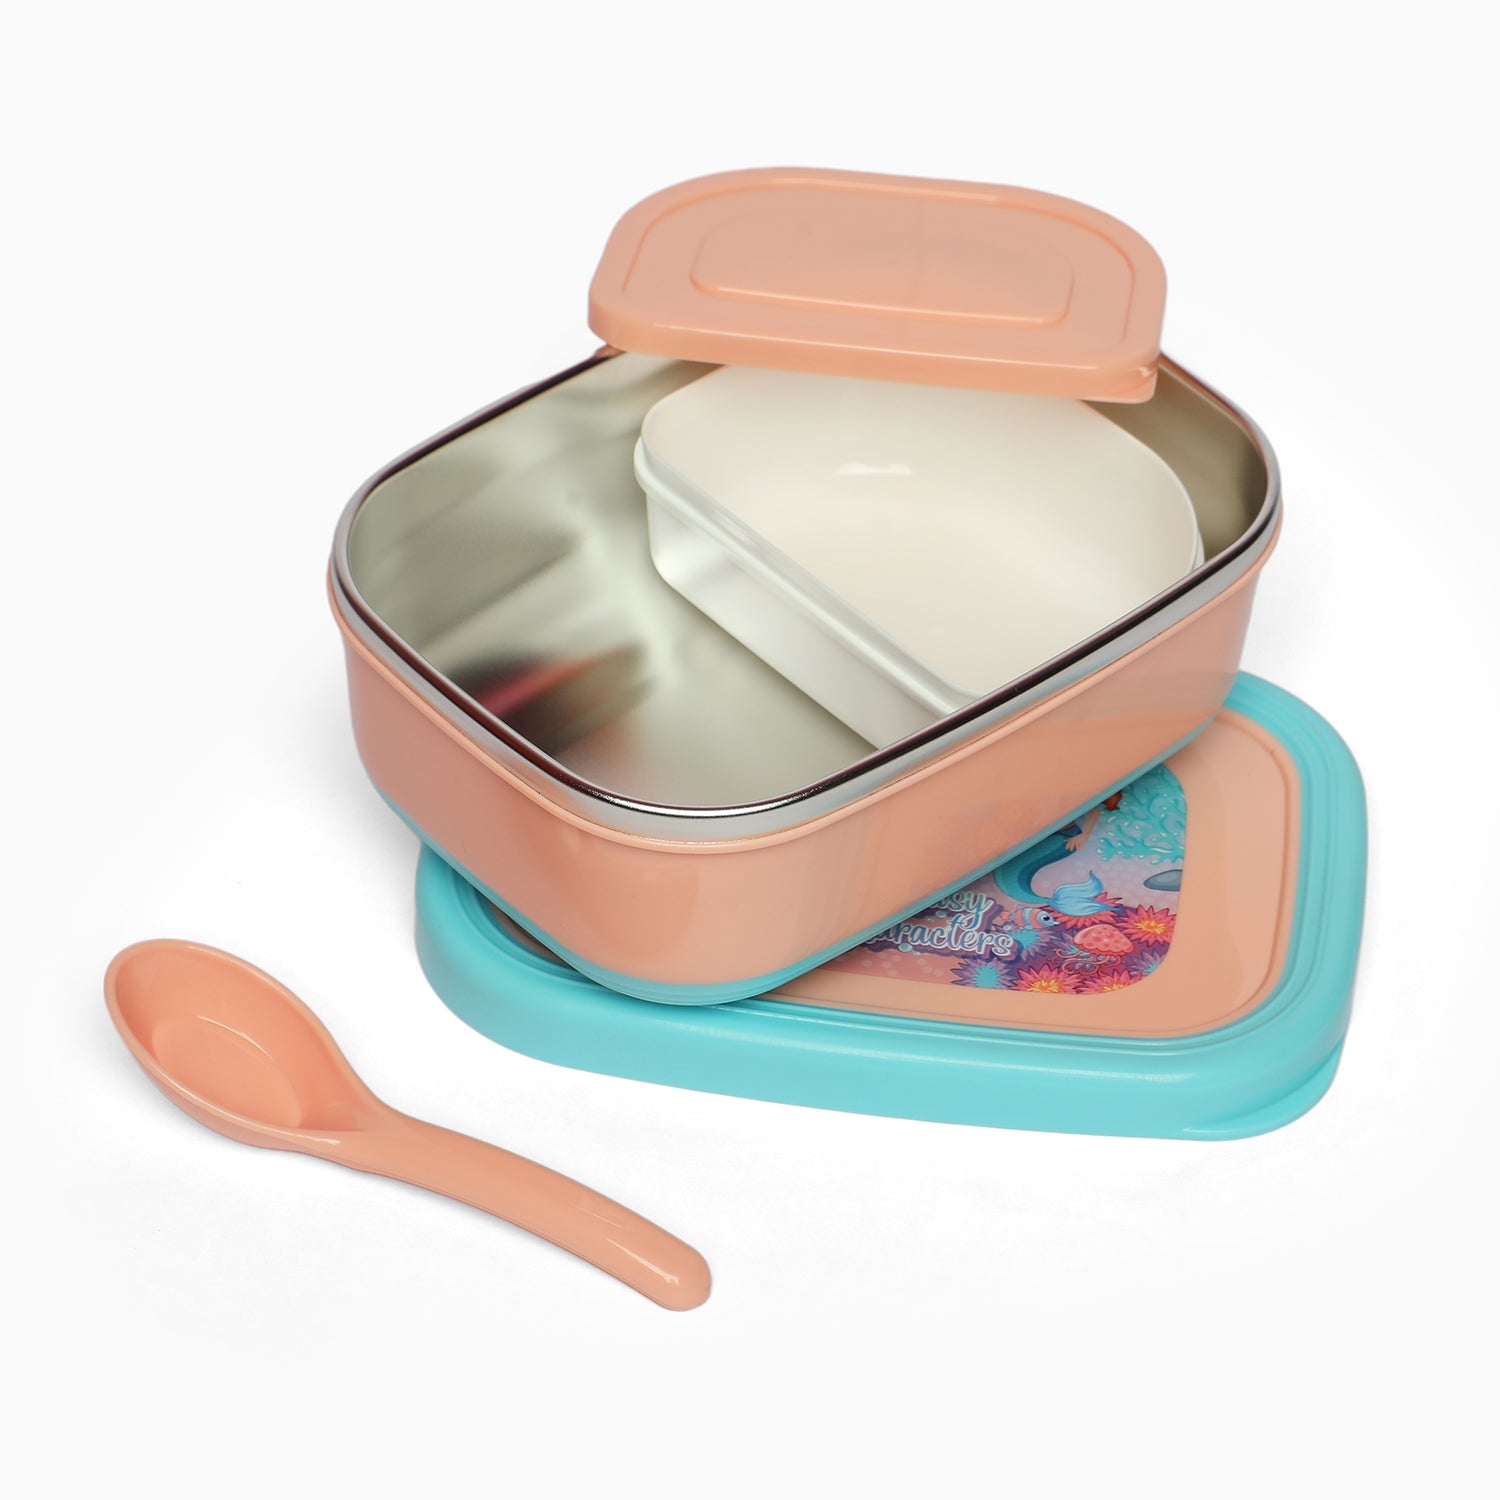 mermaid stainless steel 2 compartment lunch box